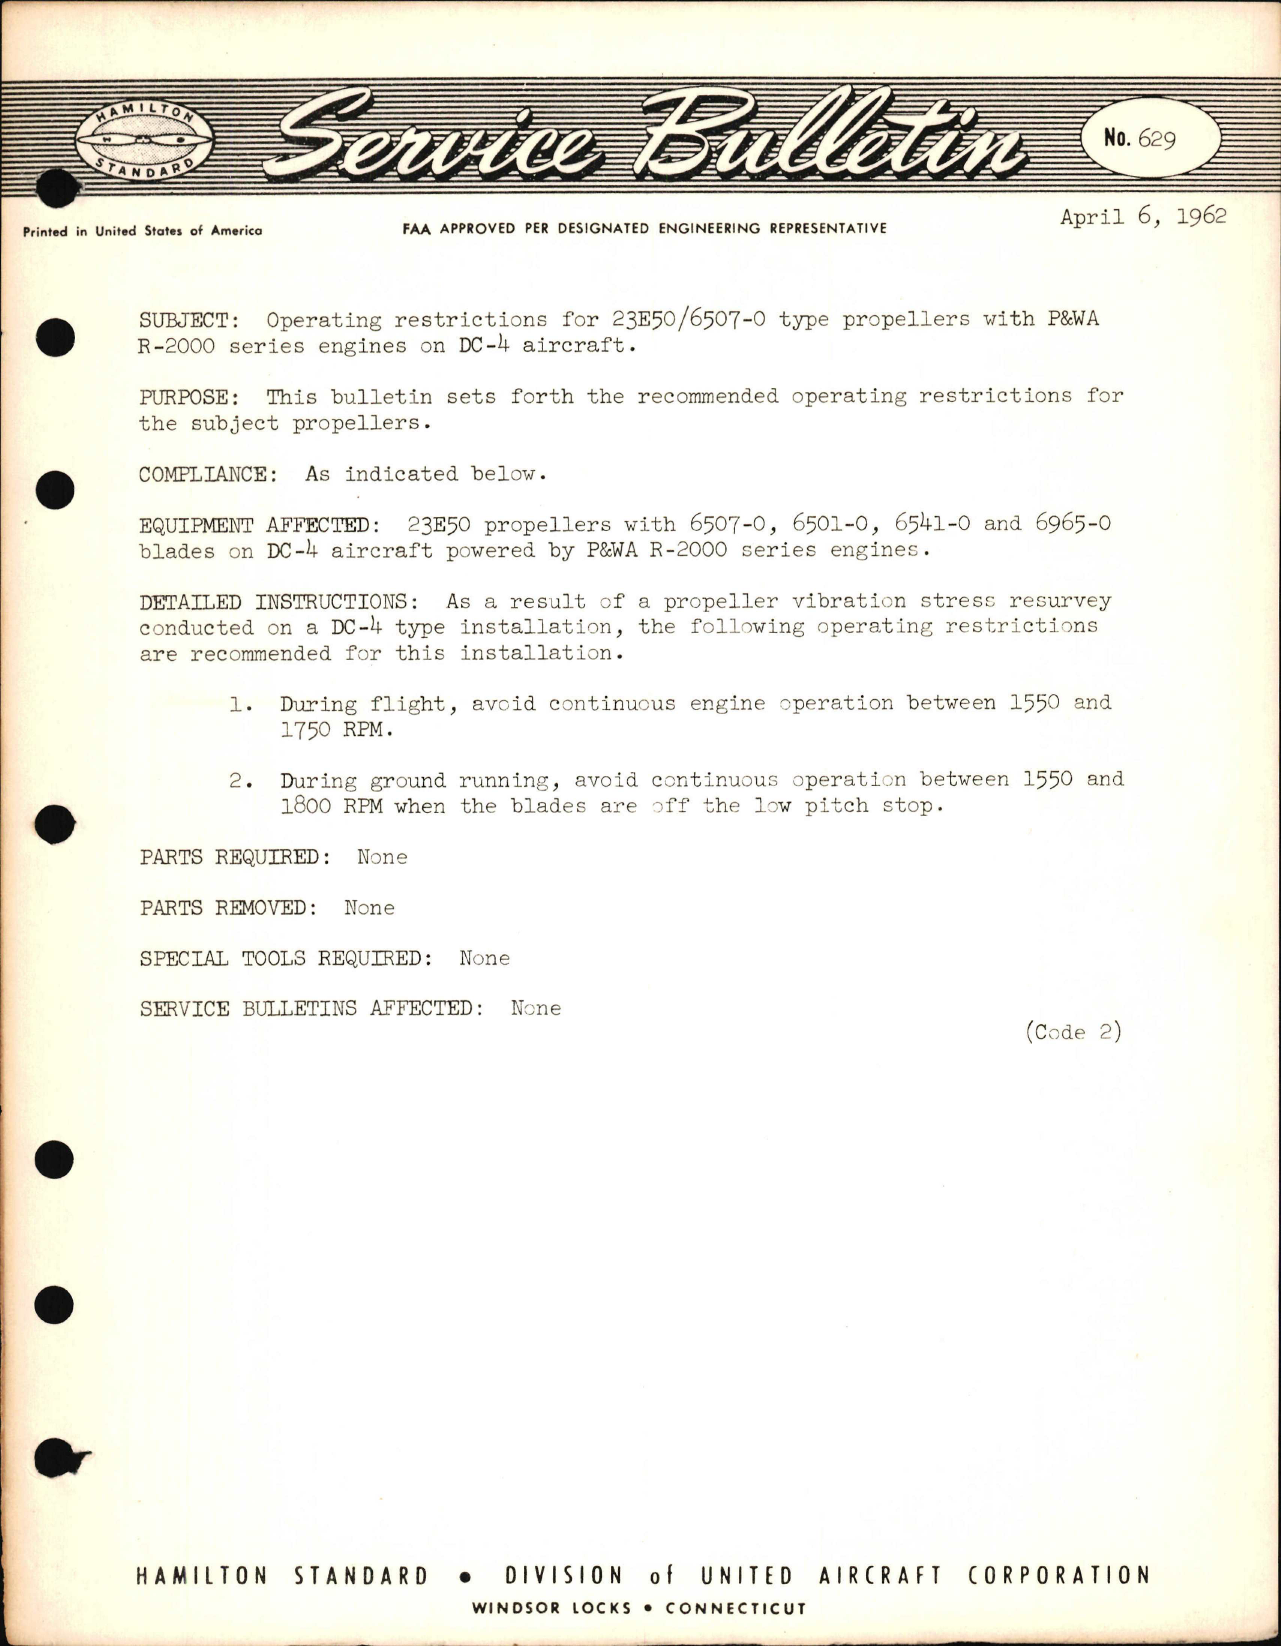 Sample page 1 from AirCorps Library document: Operating Restrictions for 23E60/6507-0 Type Propellers with P&WA R-2000 Series Engines on DC-4